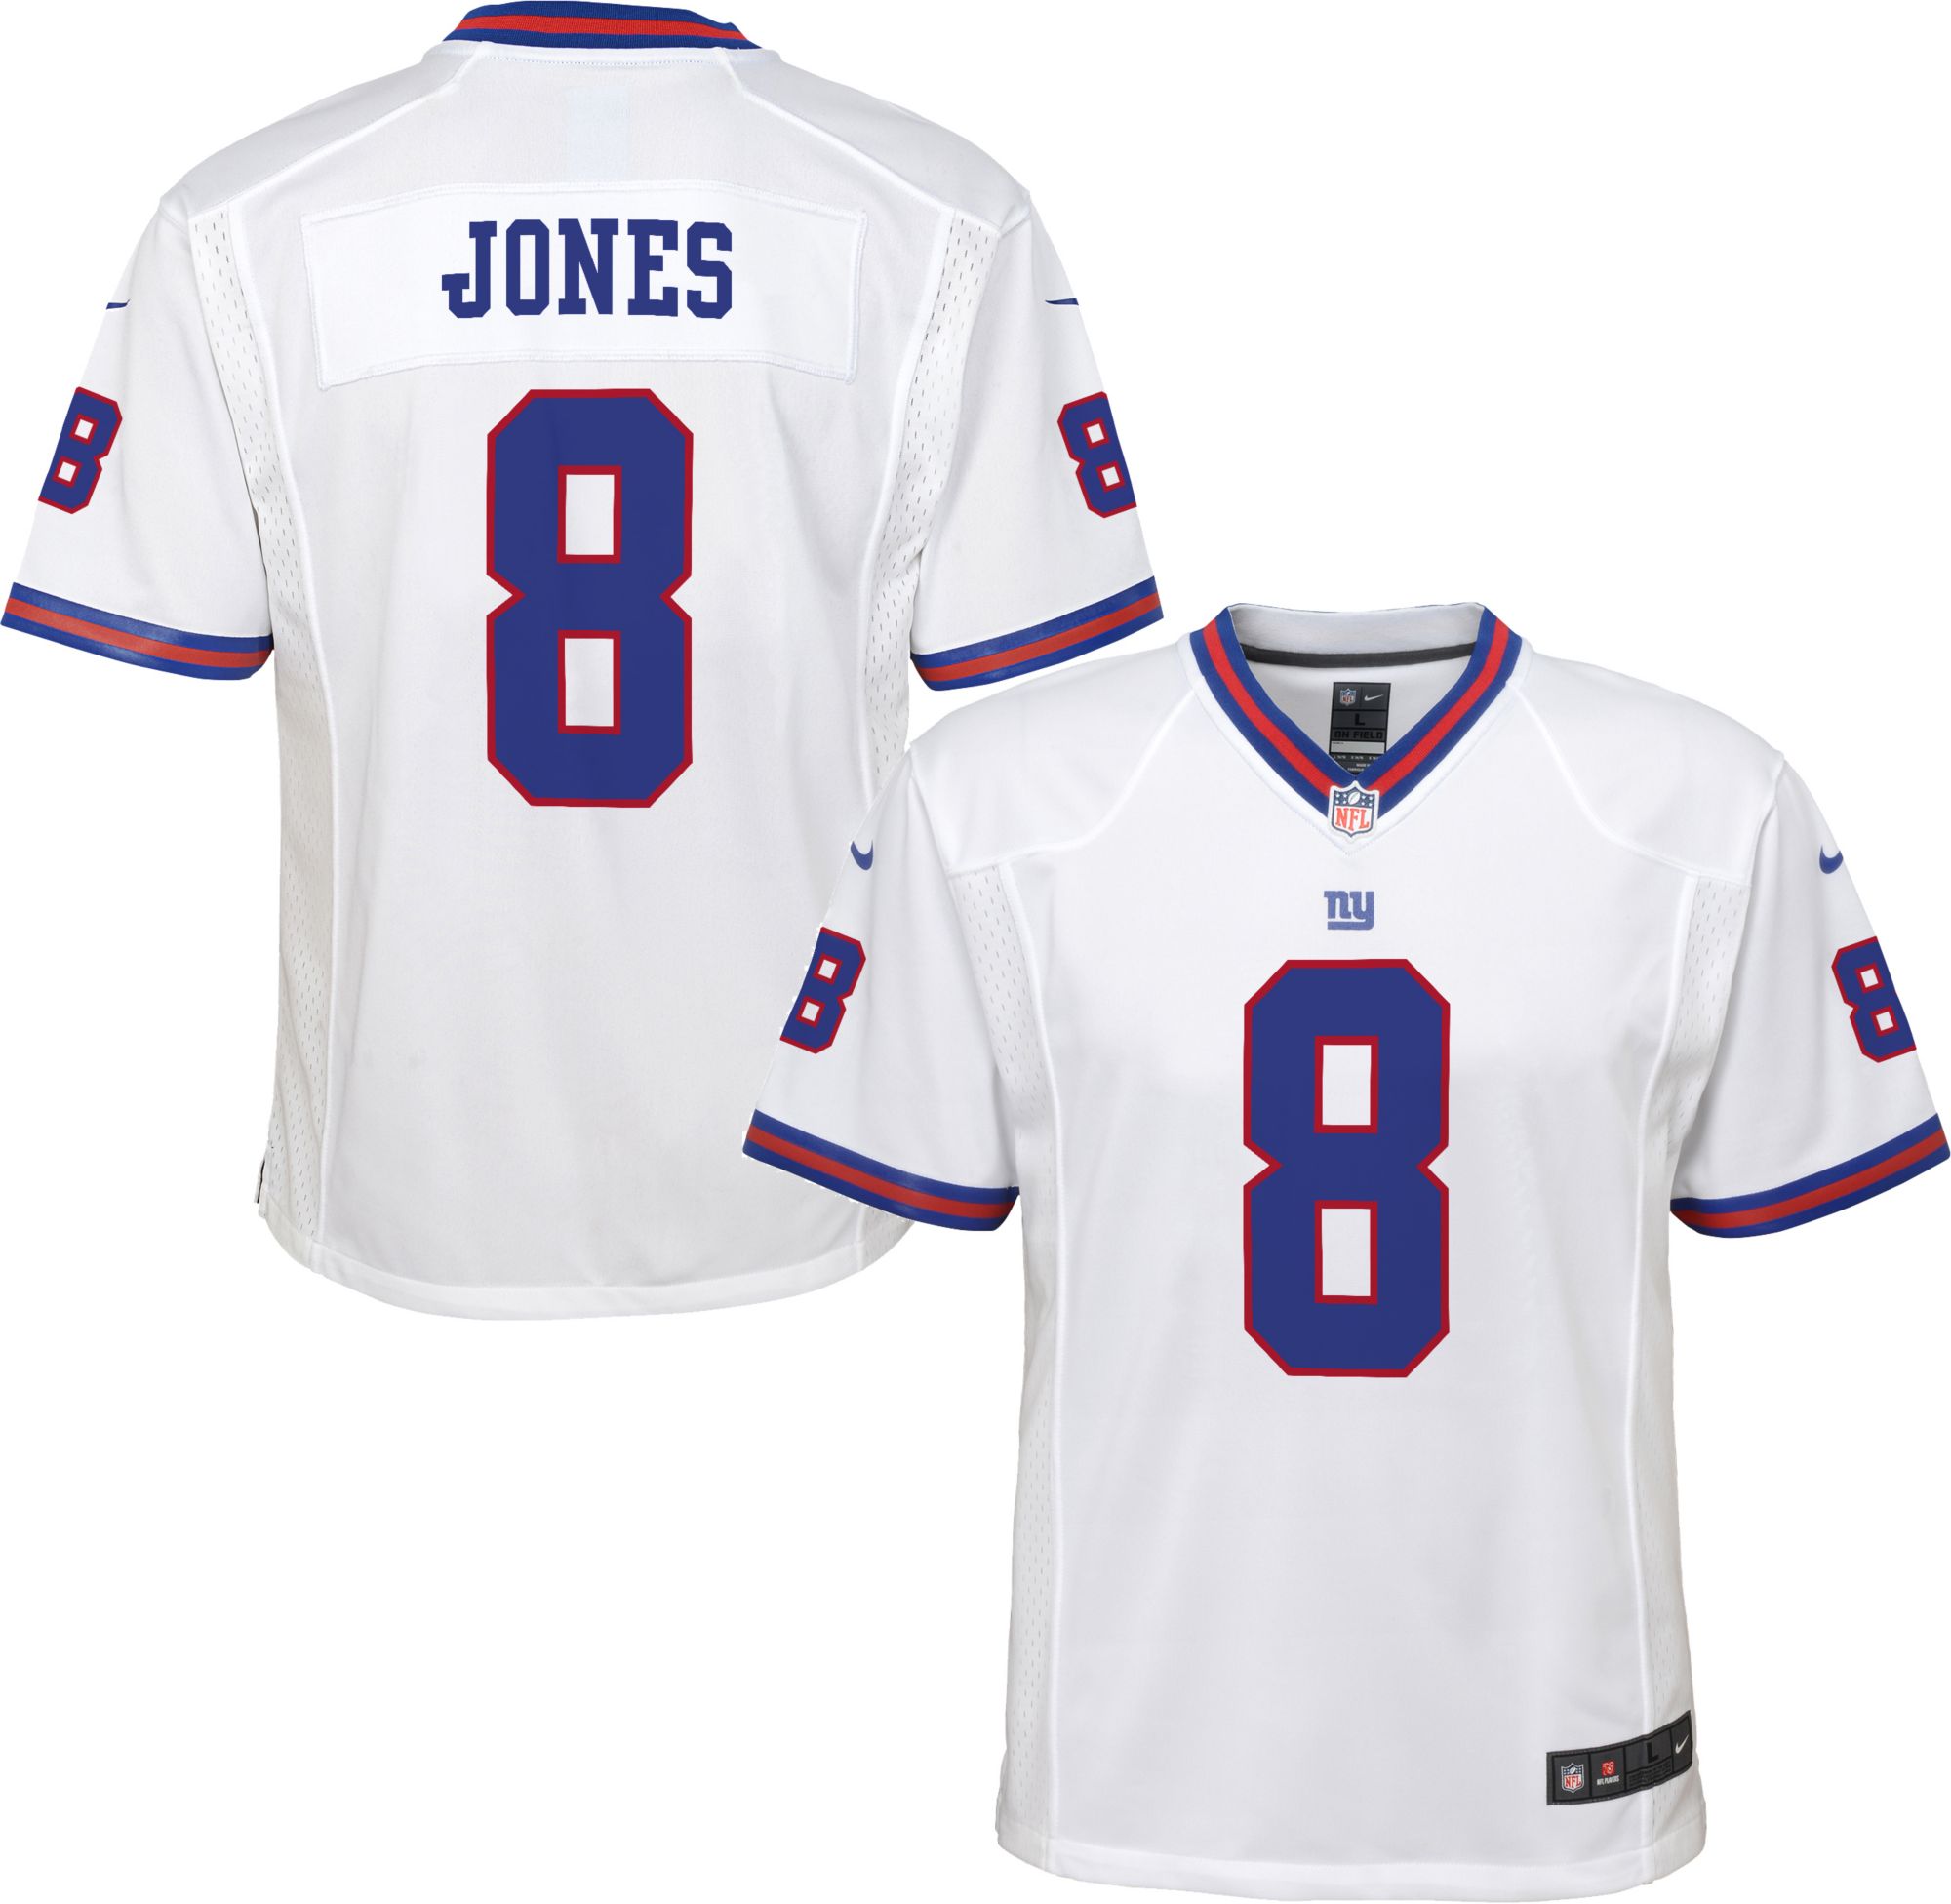 youth giants football jersey